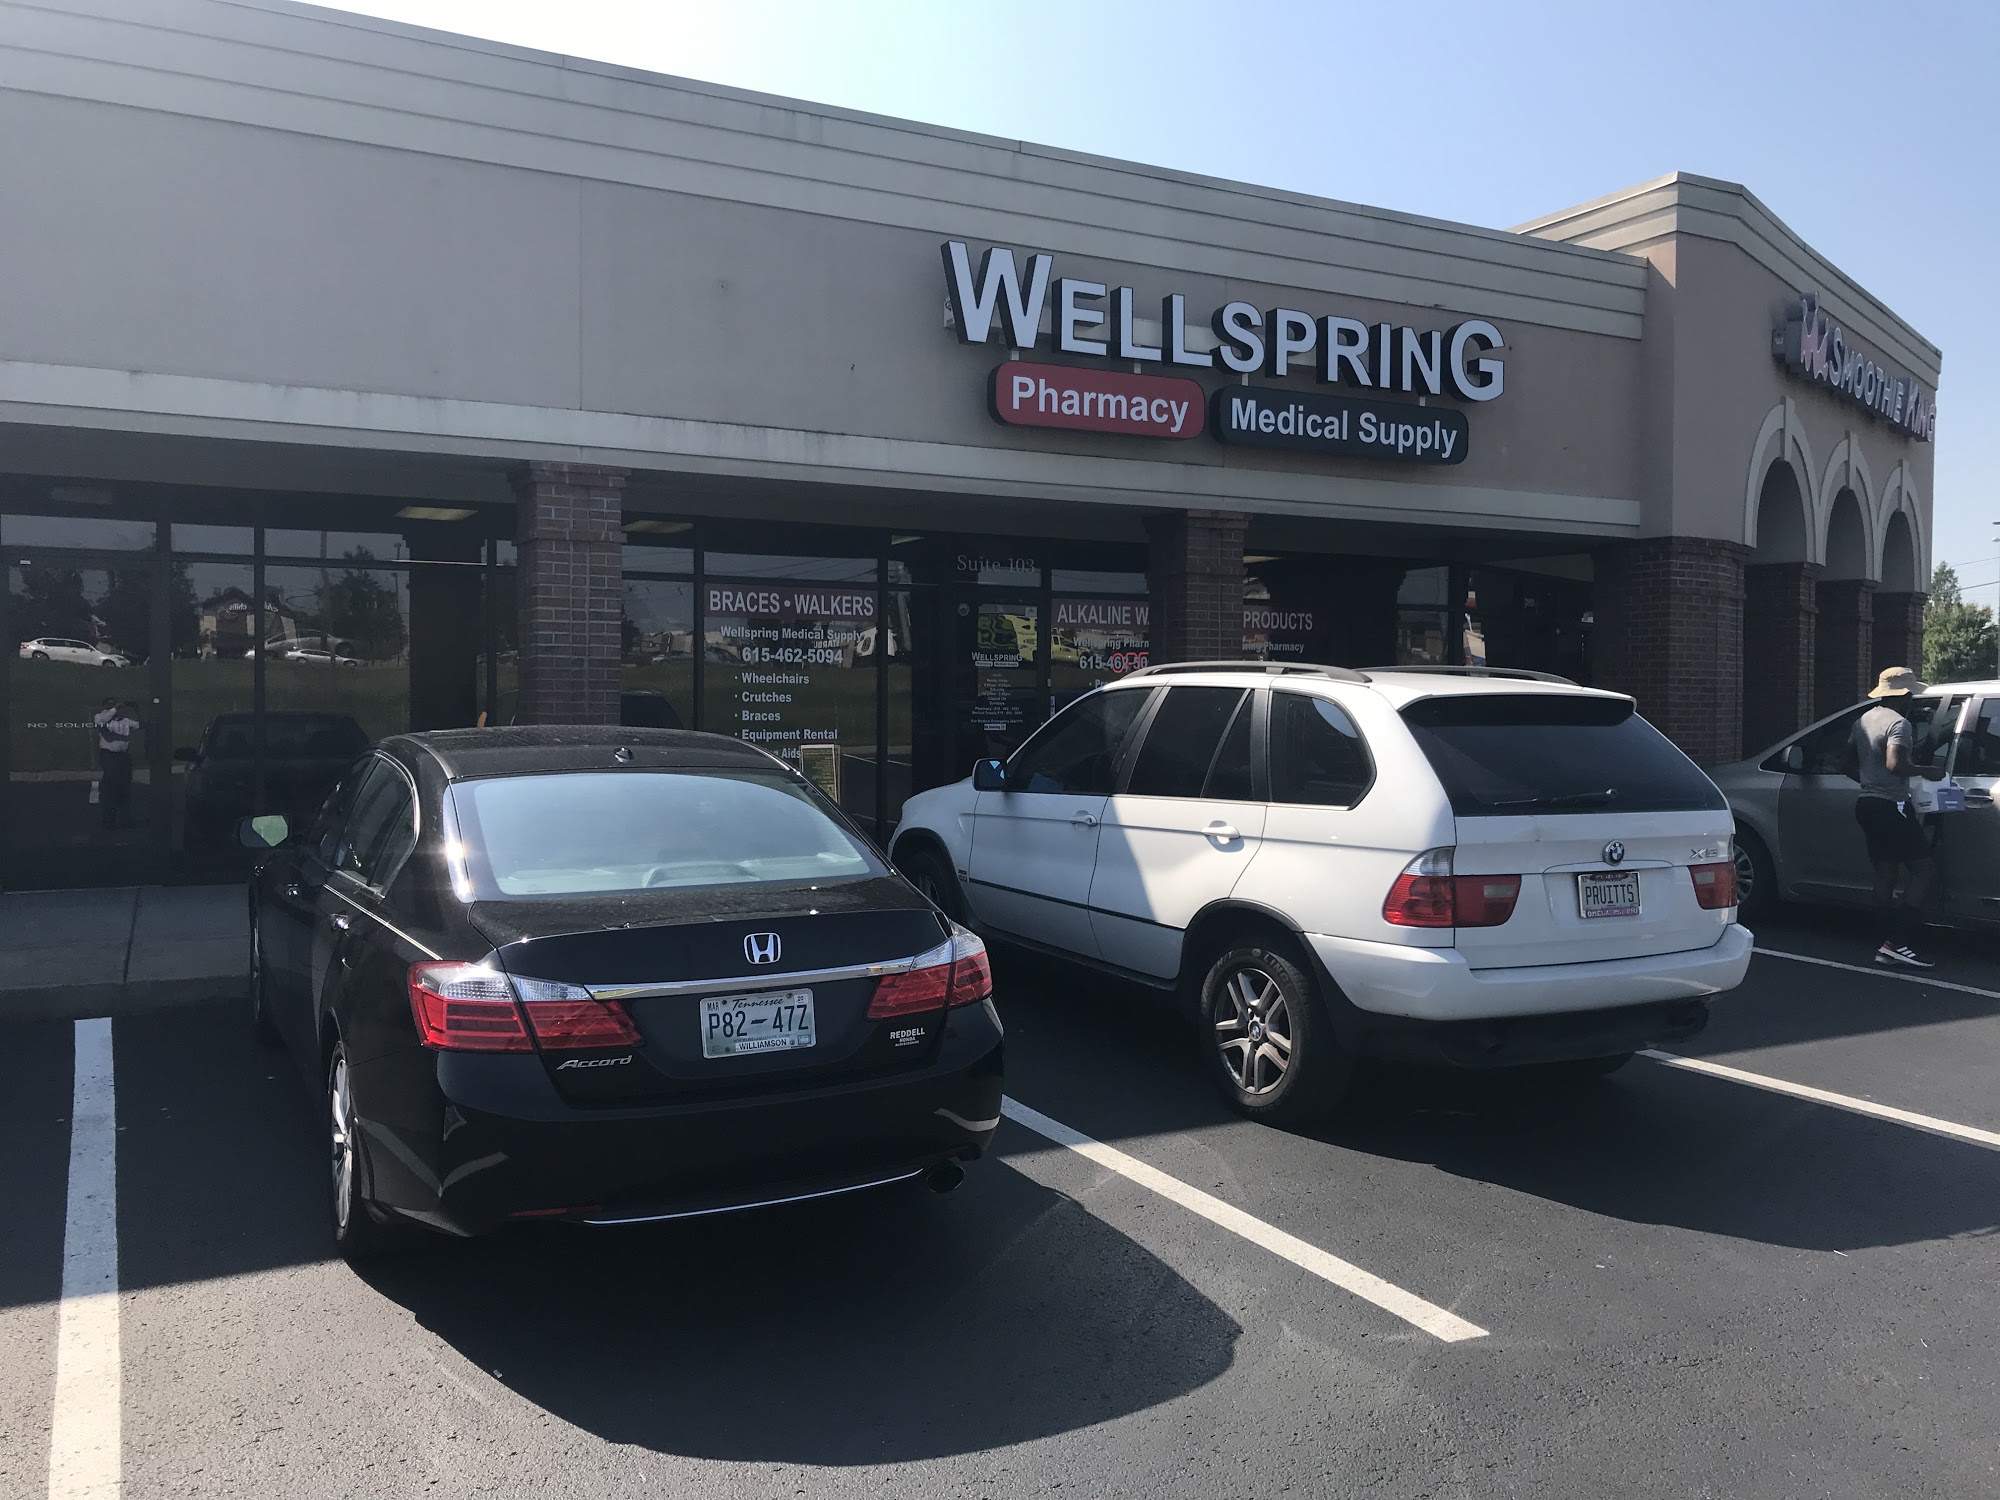 Wellspring Pharmacy and Medical Supply